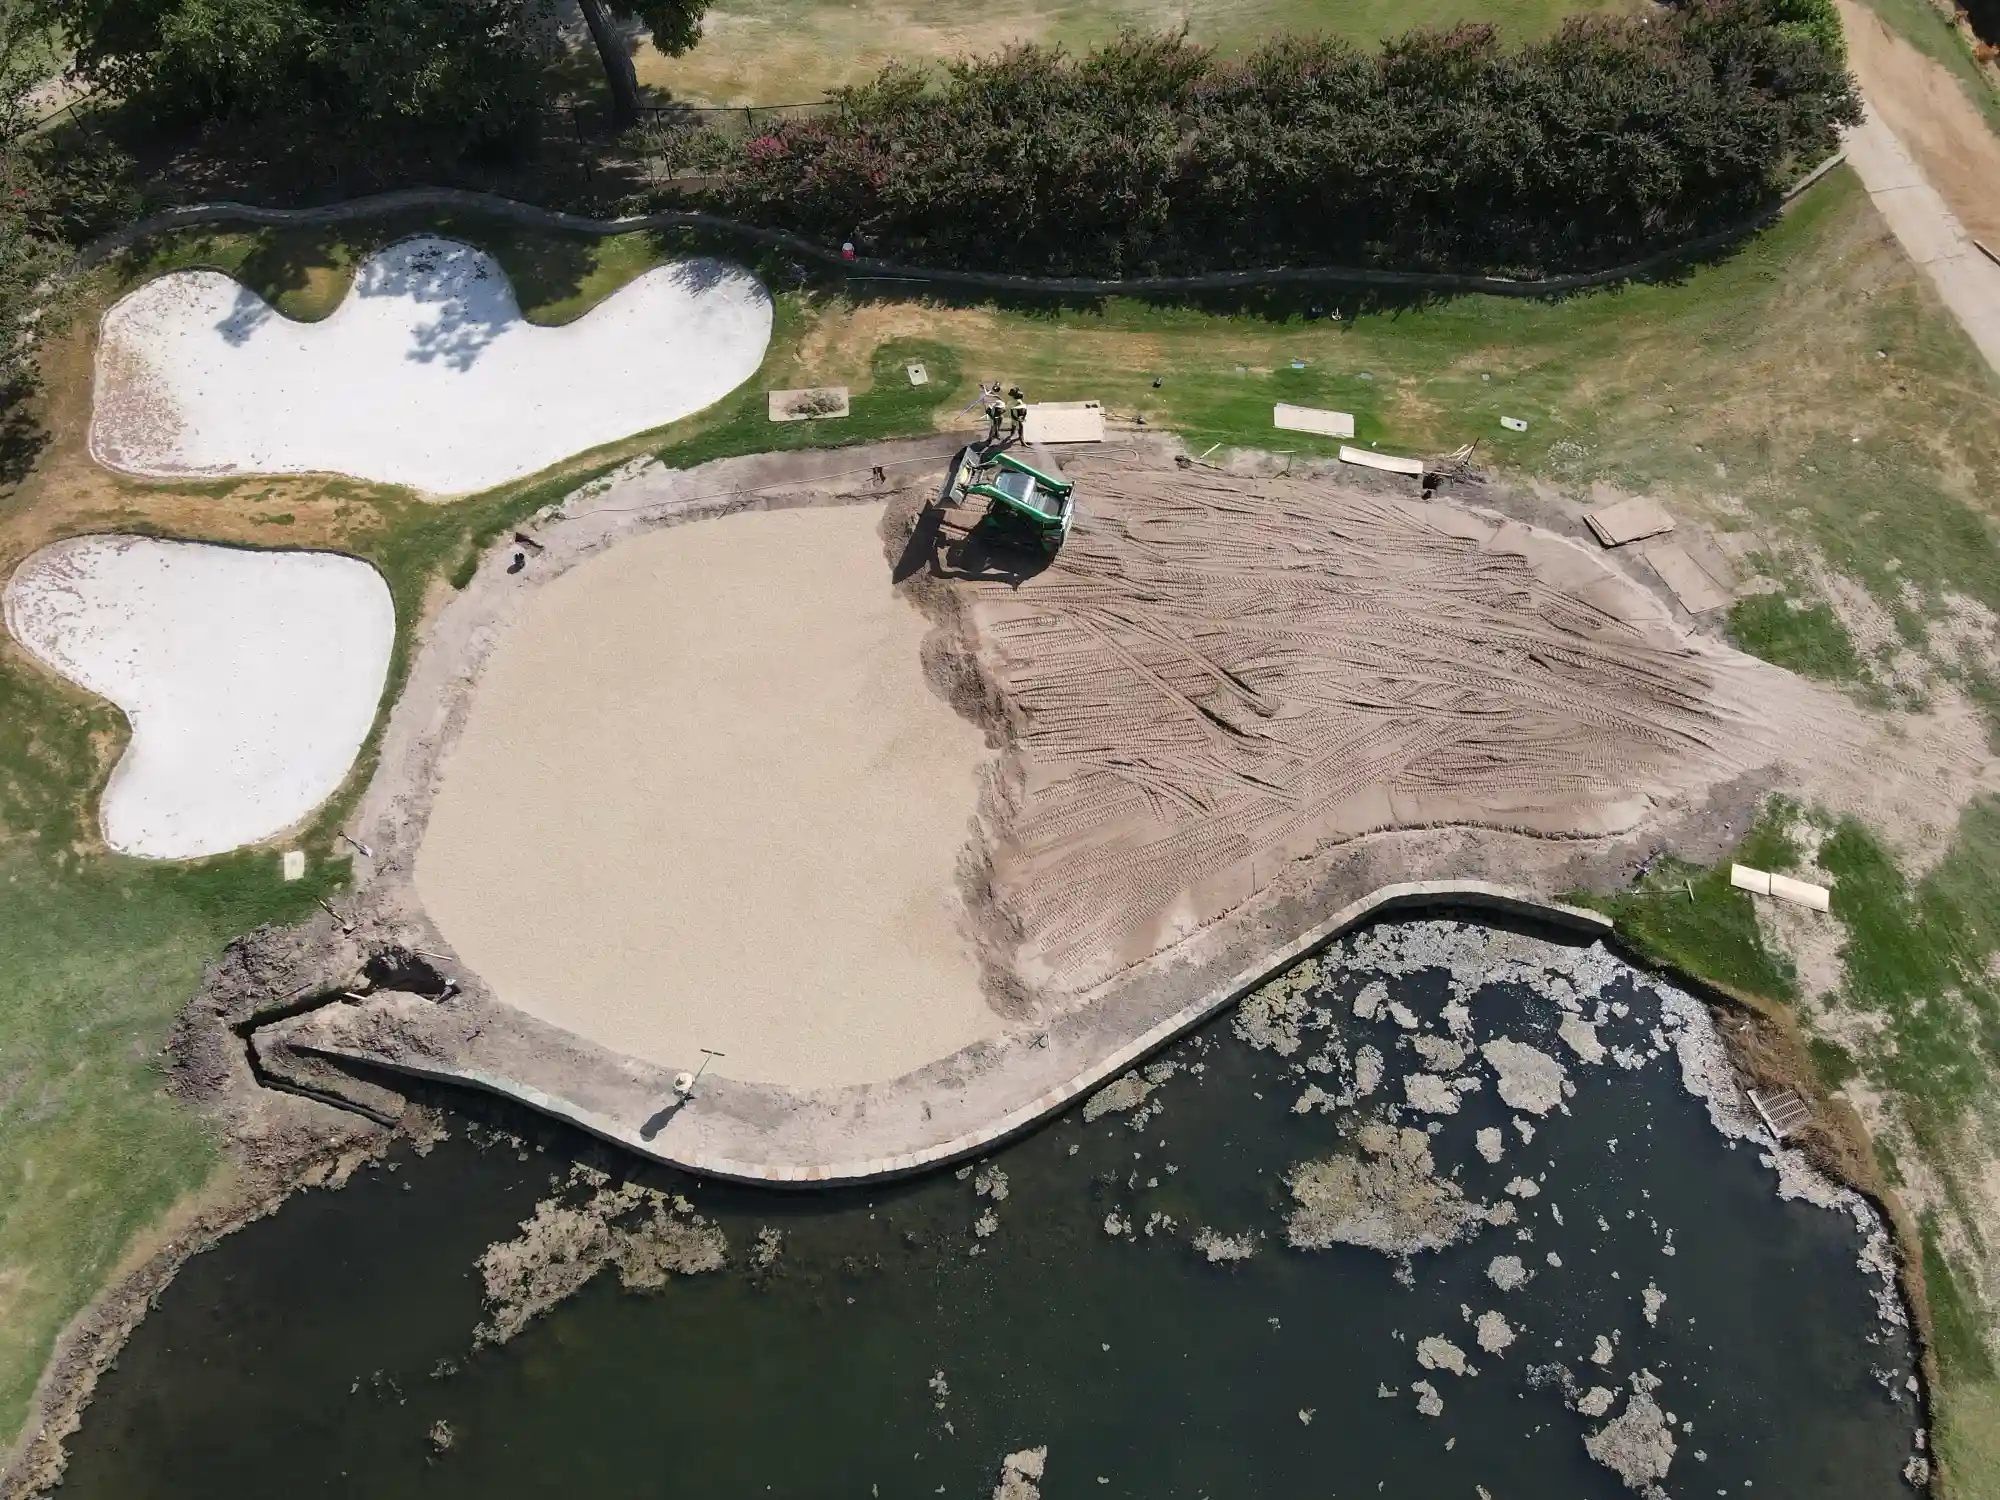 An aerial view of sand and aggregate being used in the construction of a golf course feature.